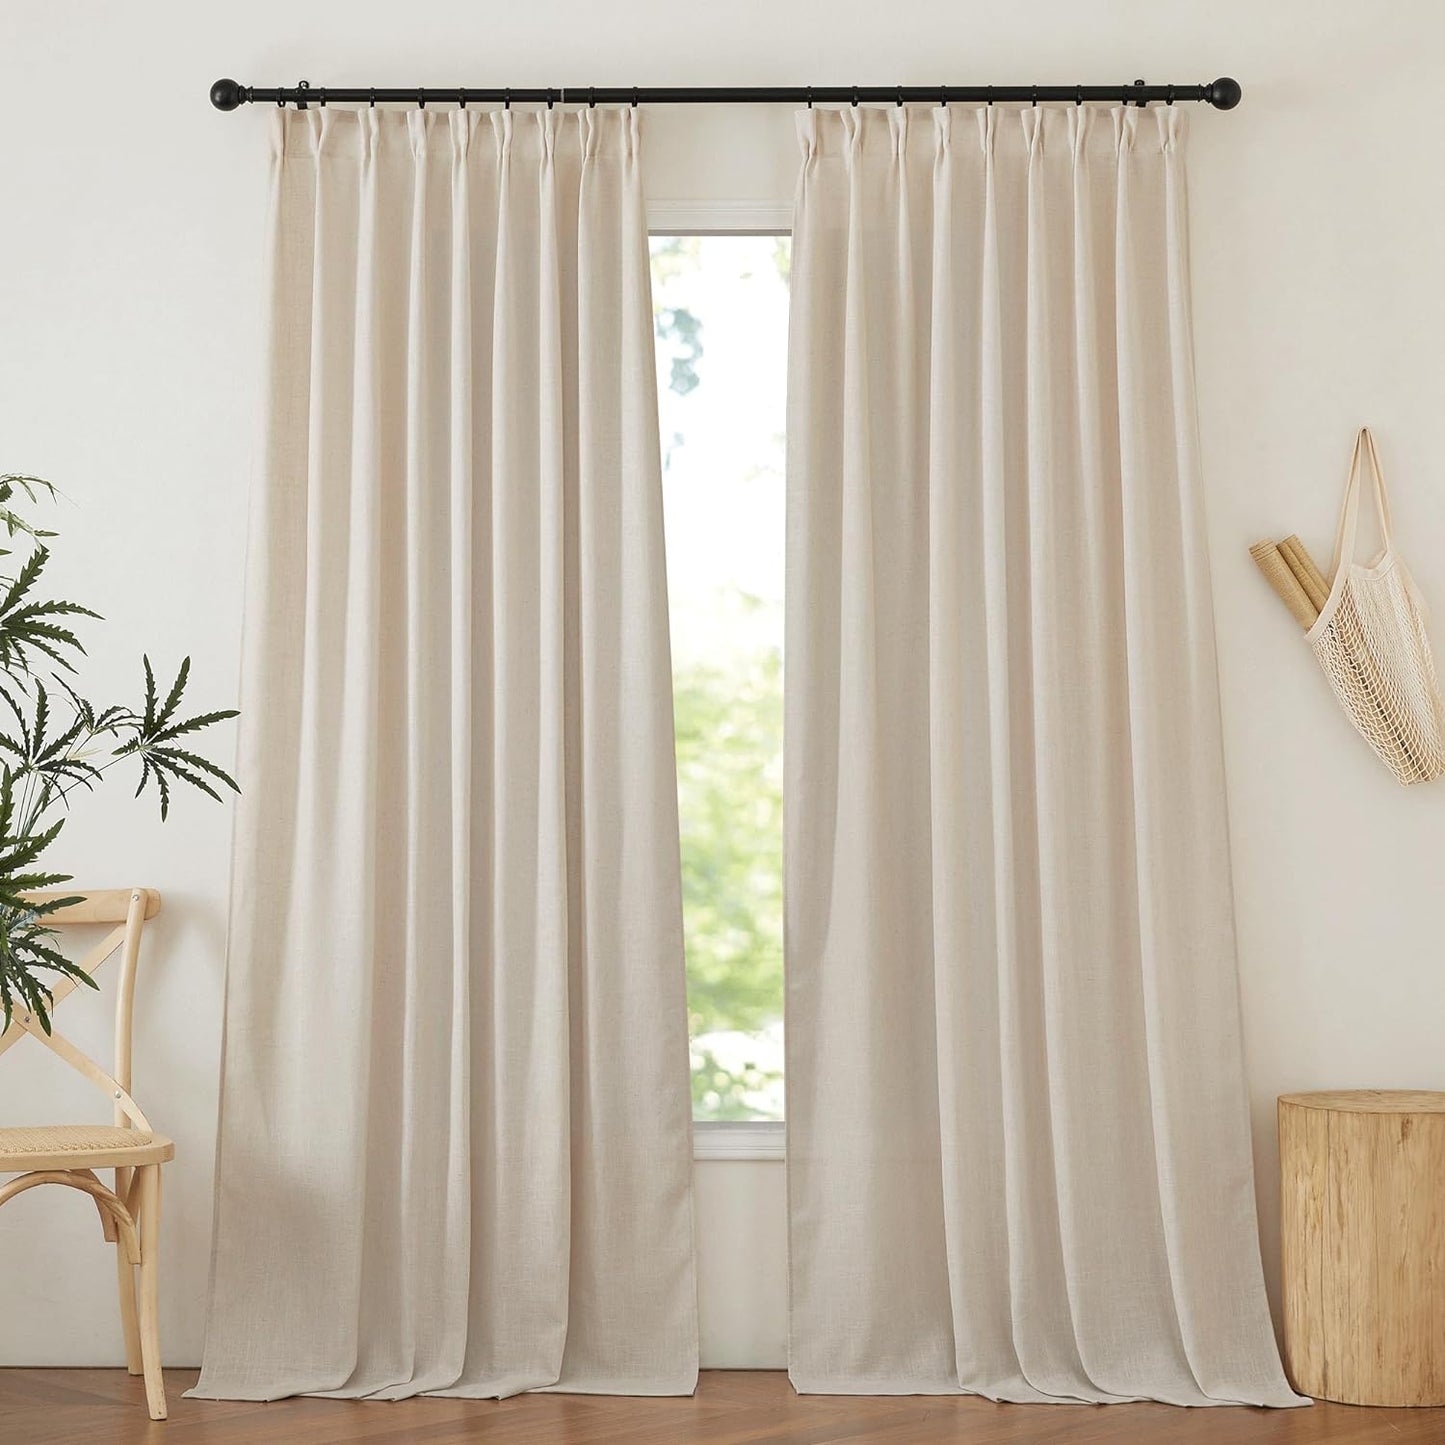 NICETOWN Linen Textured Curtain for Bedroom/Living Room Thermal Insulated Back Tab Linen Look Curtain Drapes Soft Rich Material Light Reducing Drape Panels for Window, 2 Panels, 52 X 84 Inch, Linen  NICETOWN Cream W52 X L84 